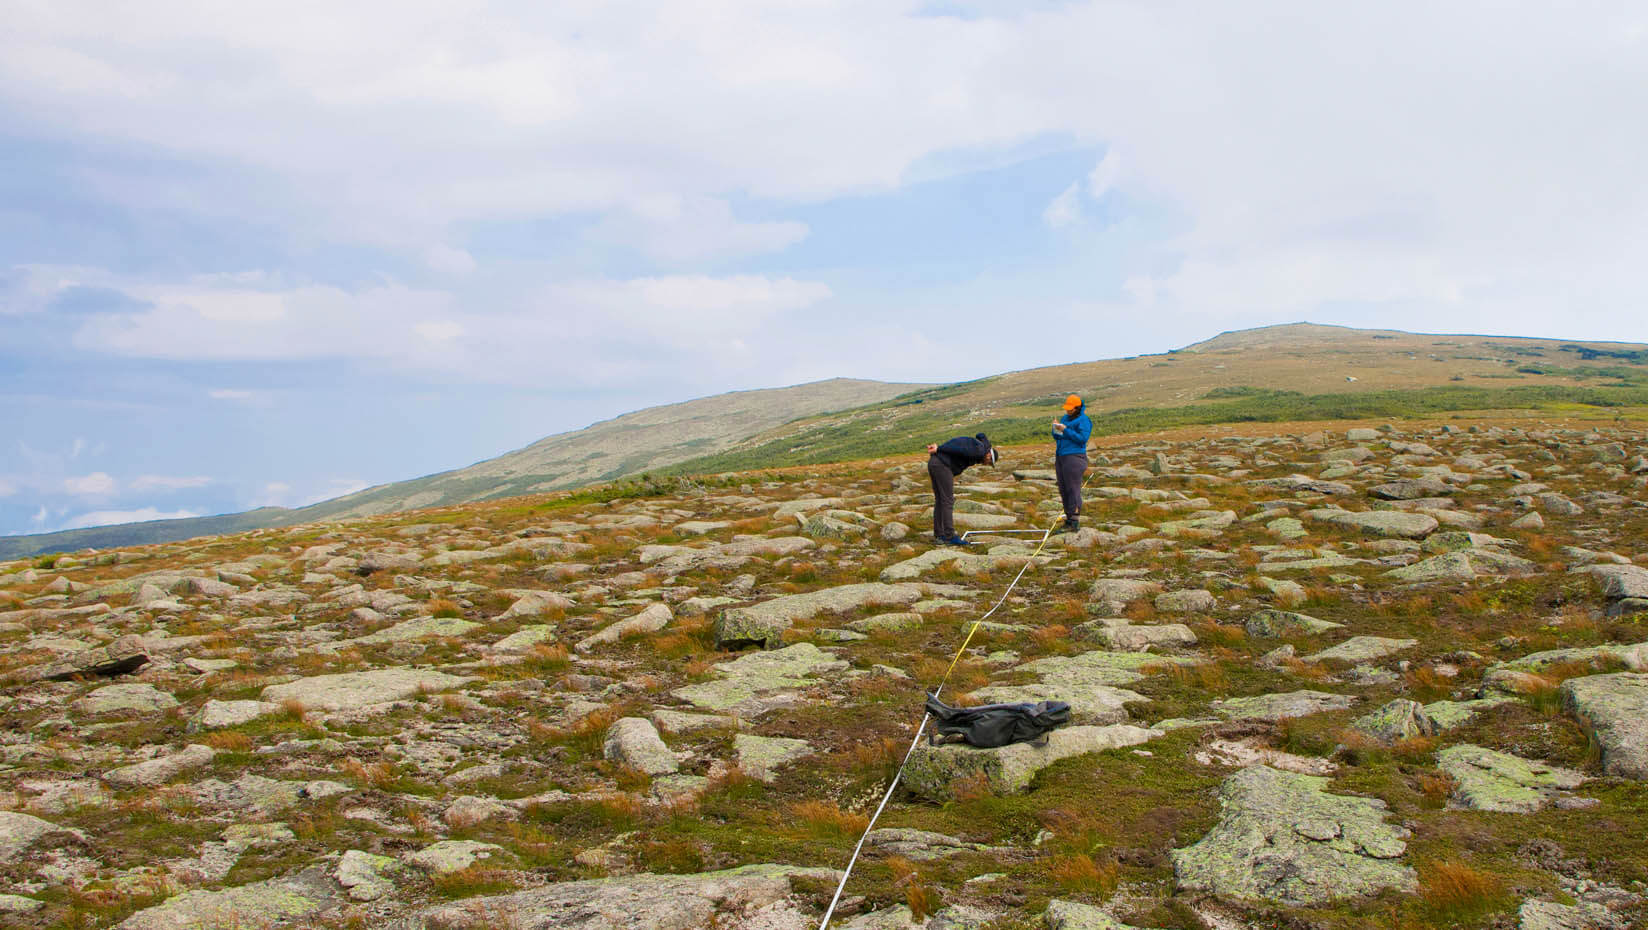 A photo of researchers on a mountain top